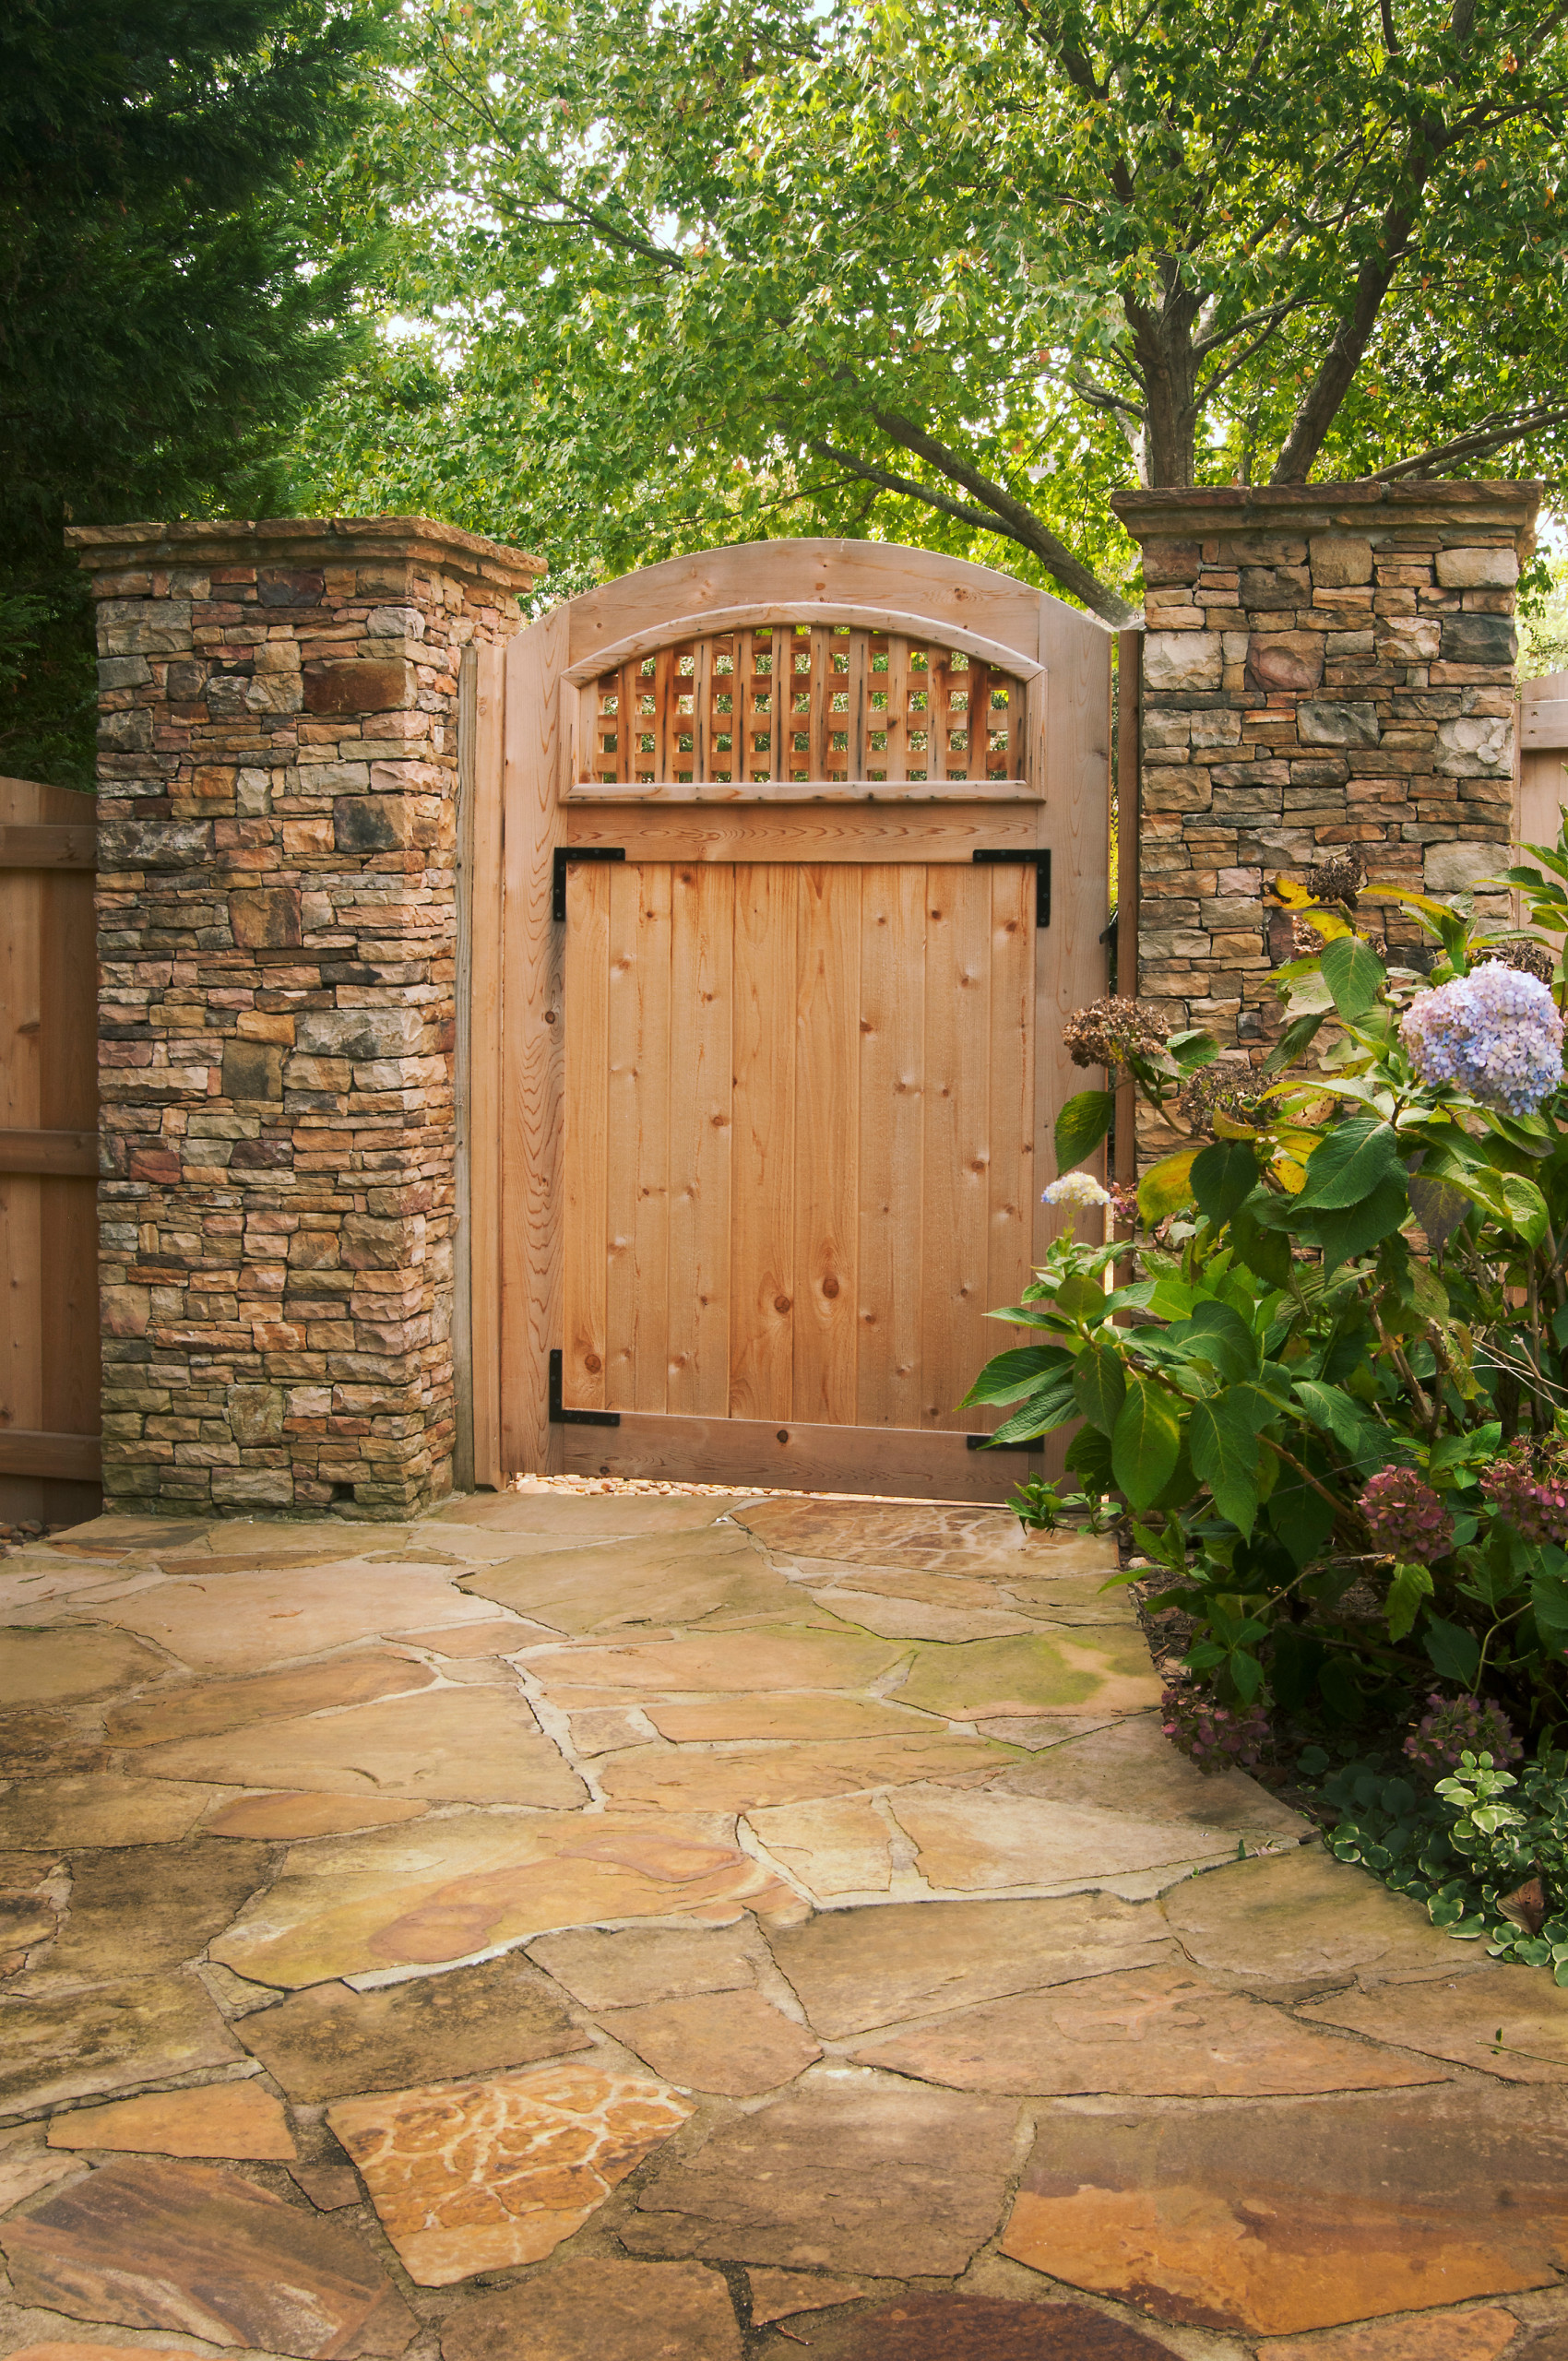 Arched Wood Gate - Photos & Ideas | Houzz